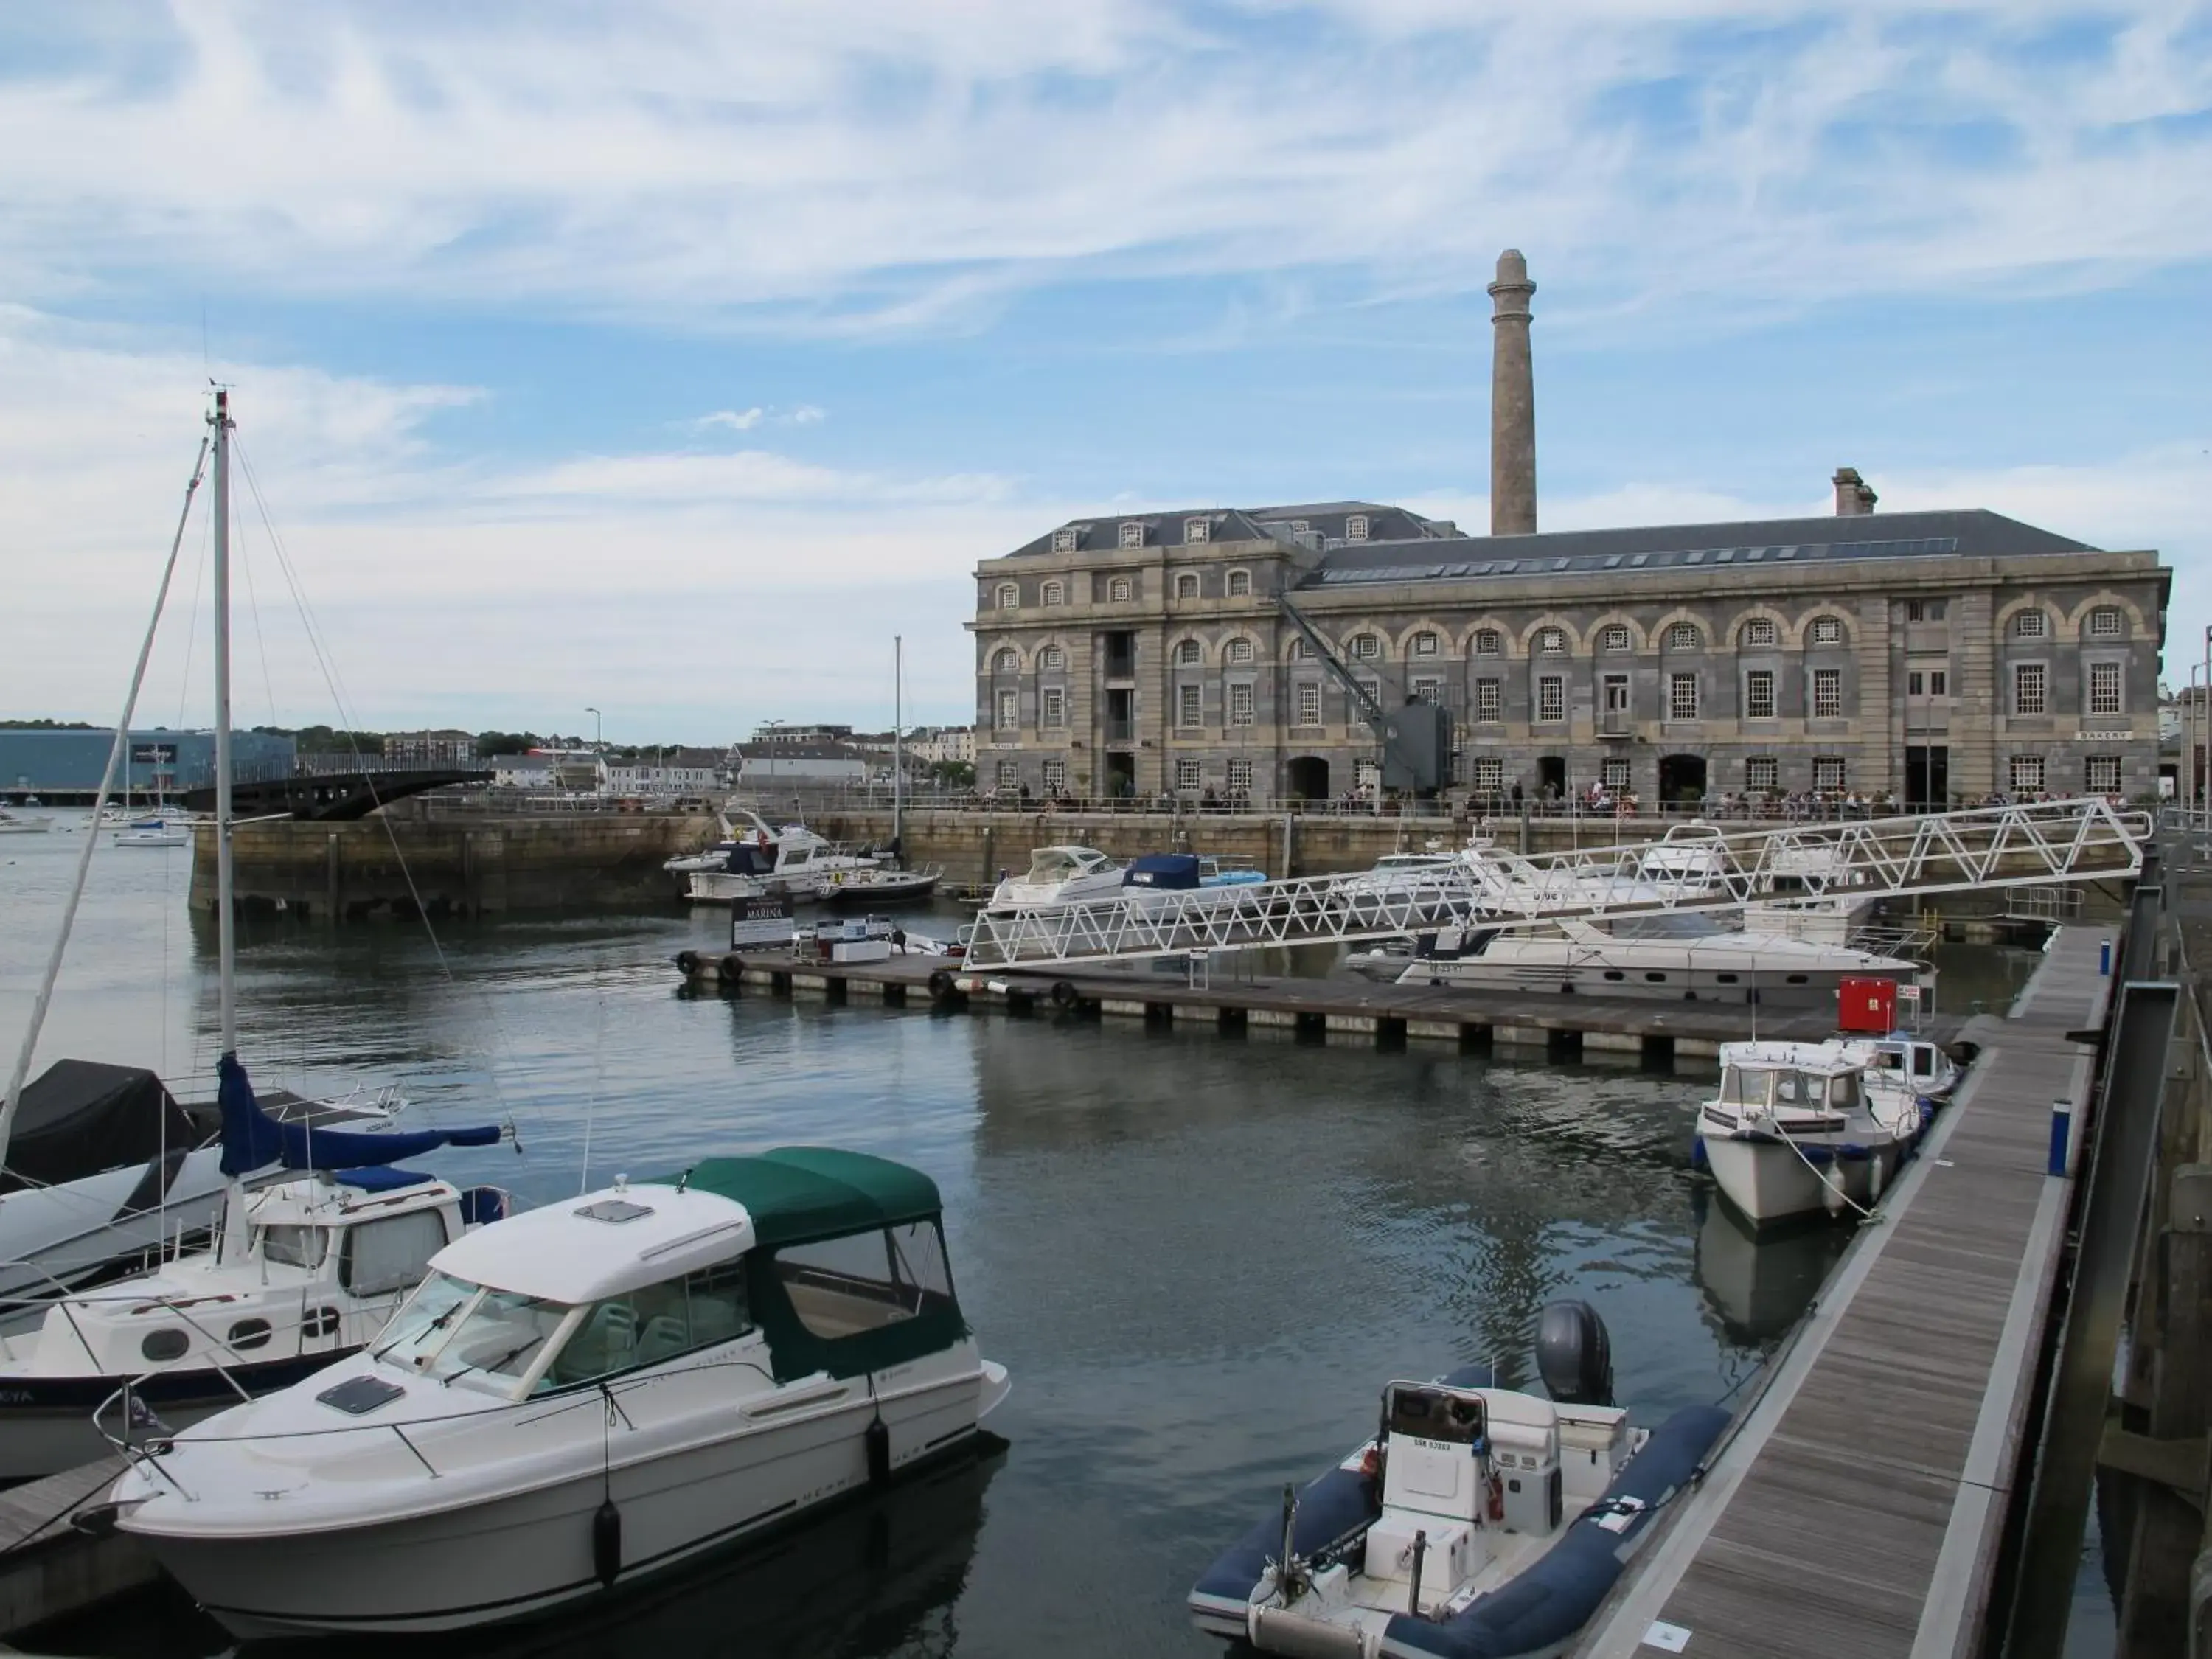 Property building in 45 Brewhouse - Royal William Yard